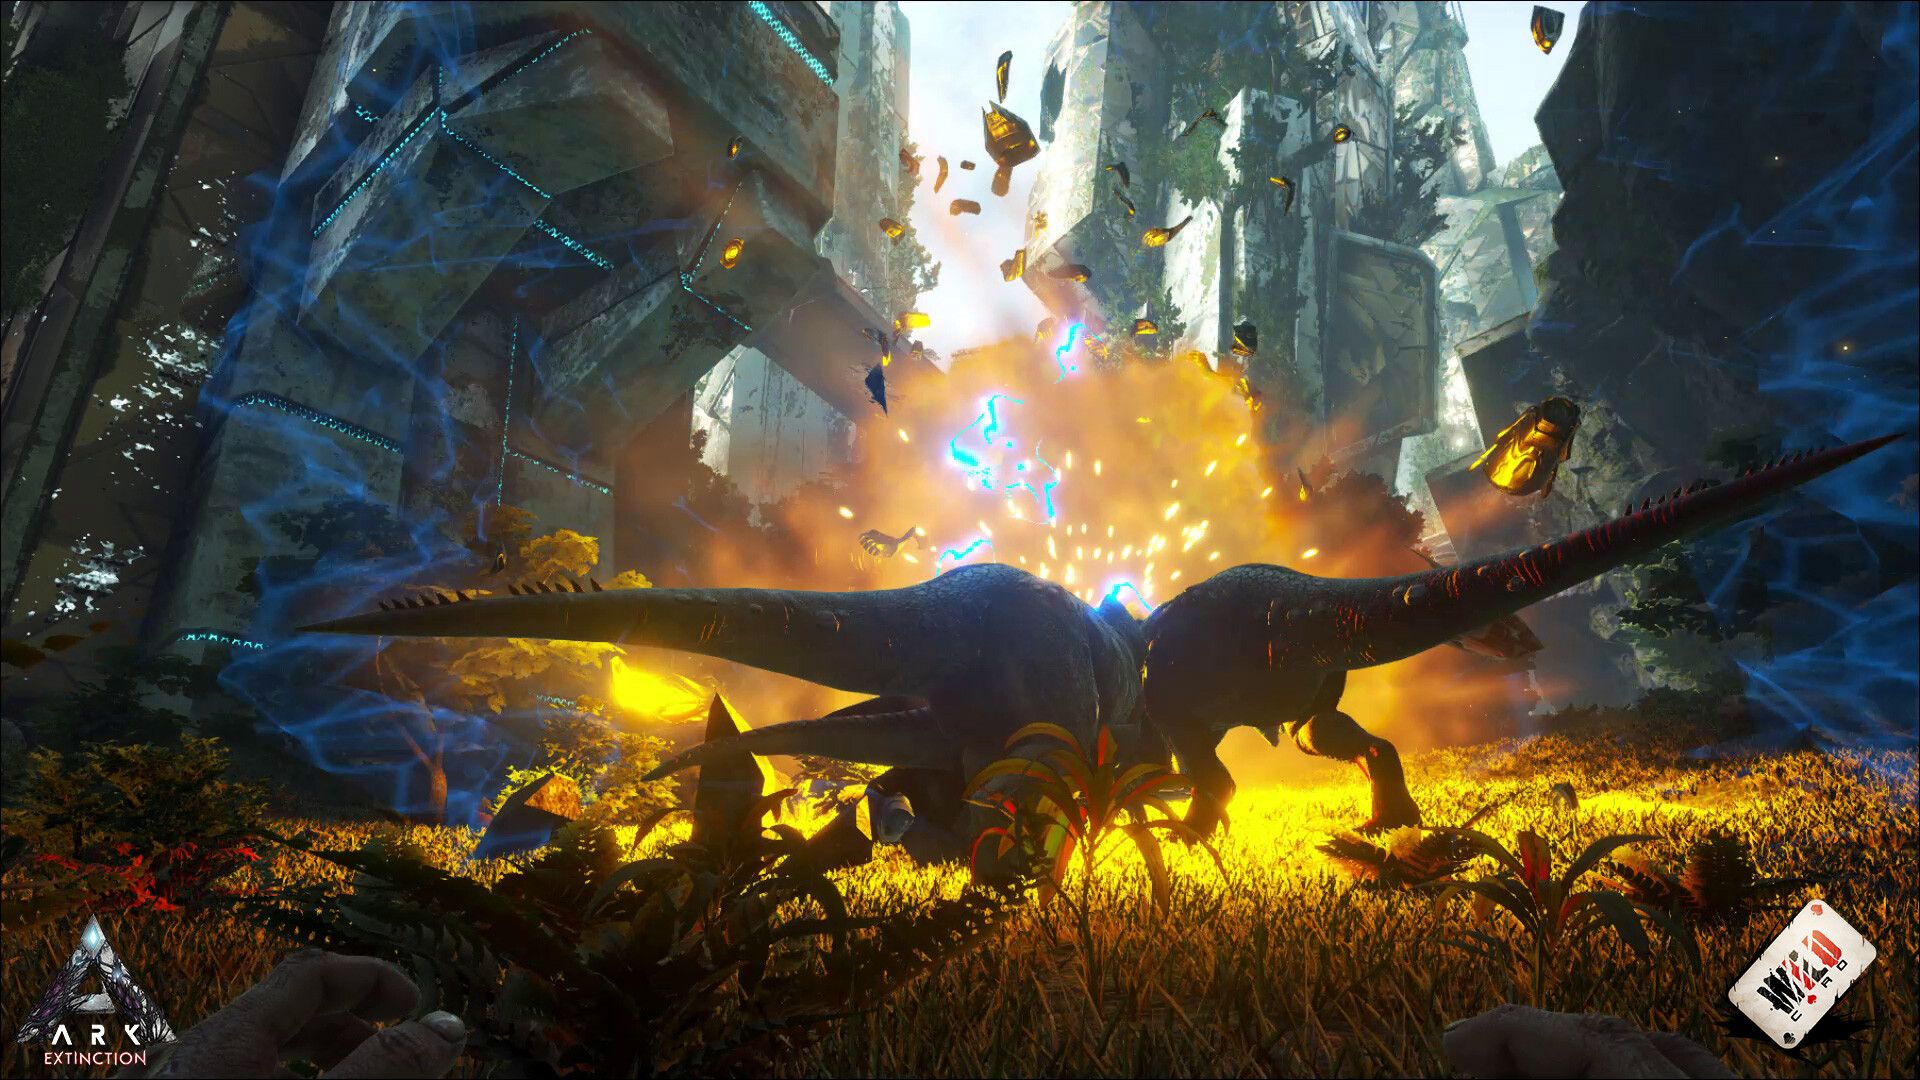 Ark Extinction Wallpaper Hd Related Keywords & Suggestions -